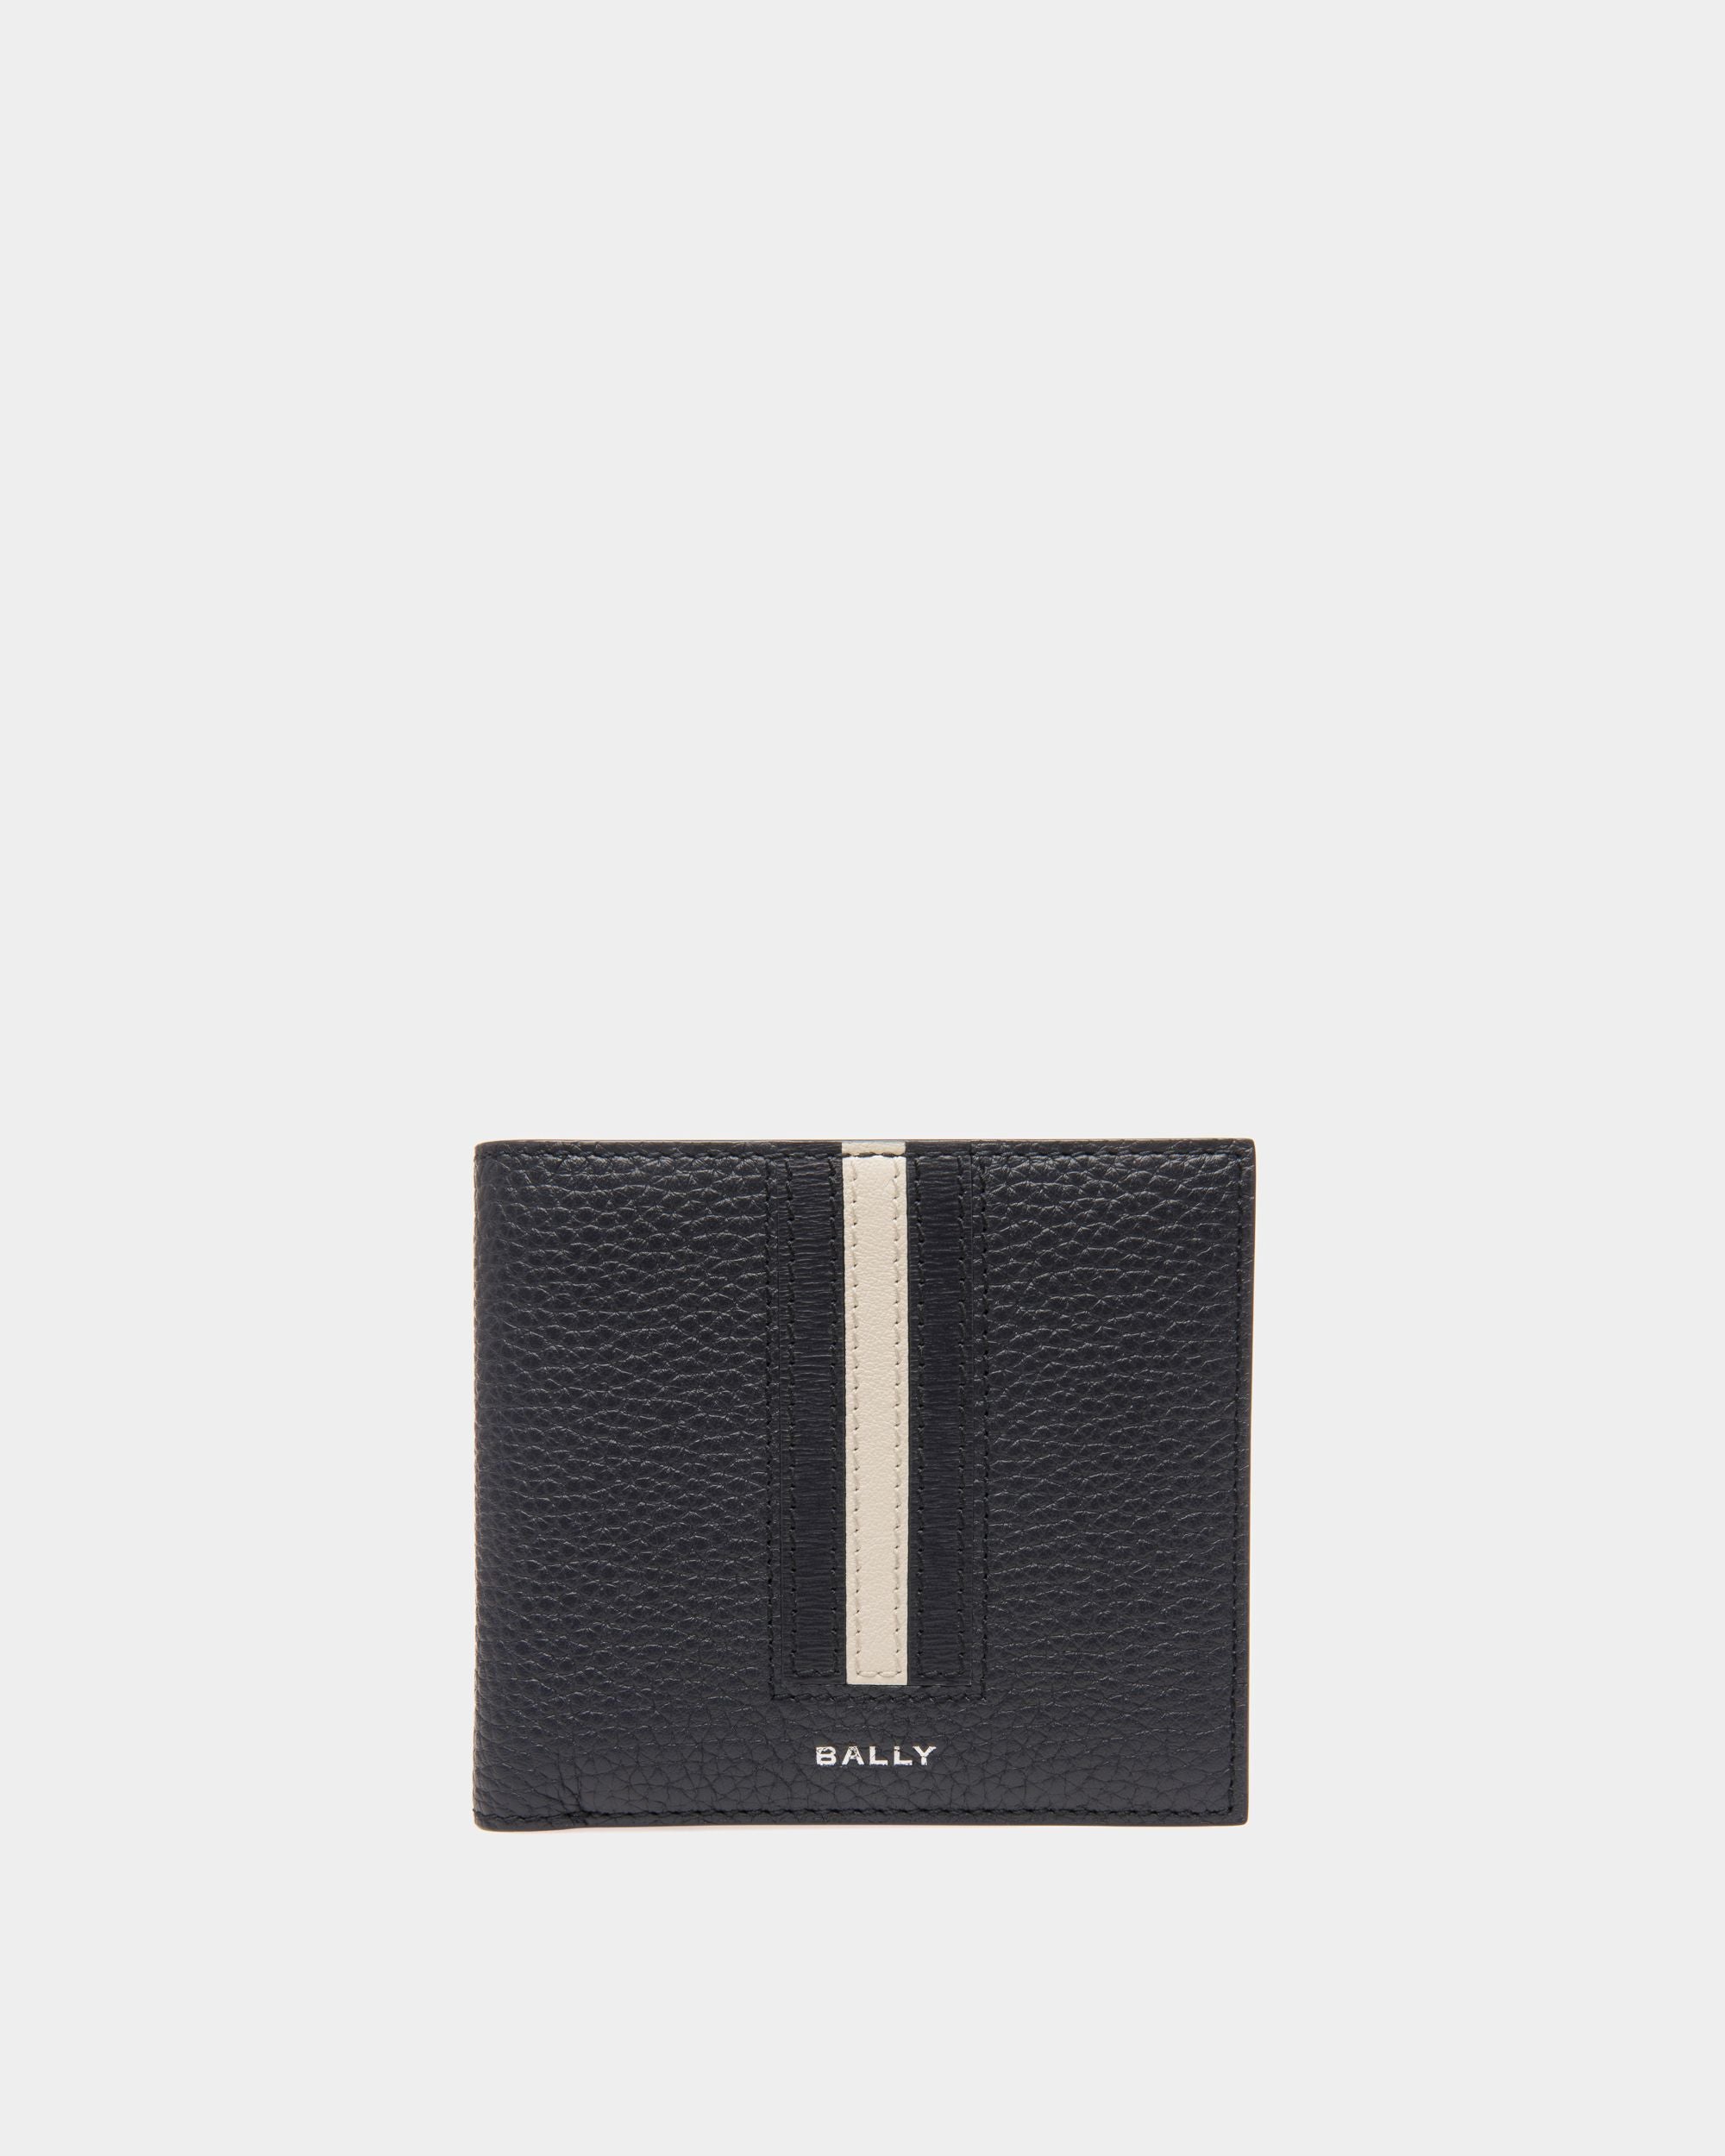 Ribbon Bi-fold | Men's Wallets And Coin Purses | Midnight Leather | Bally | Still Life Front